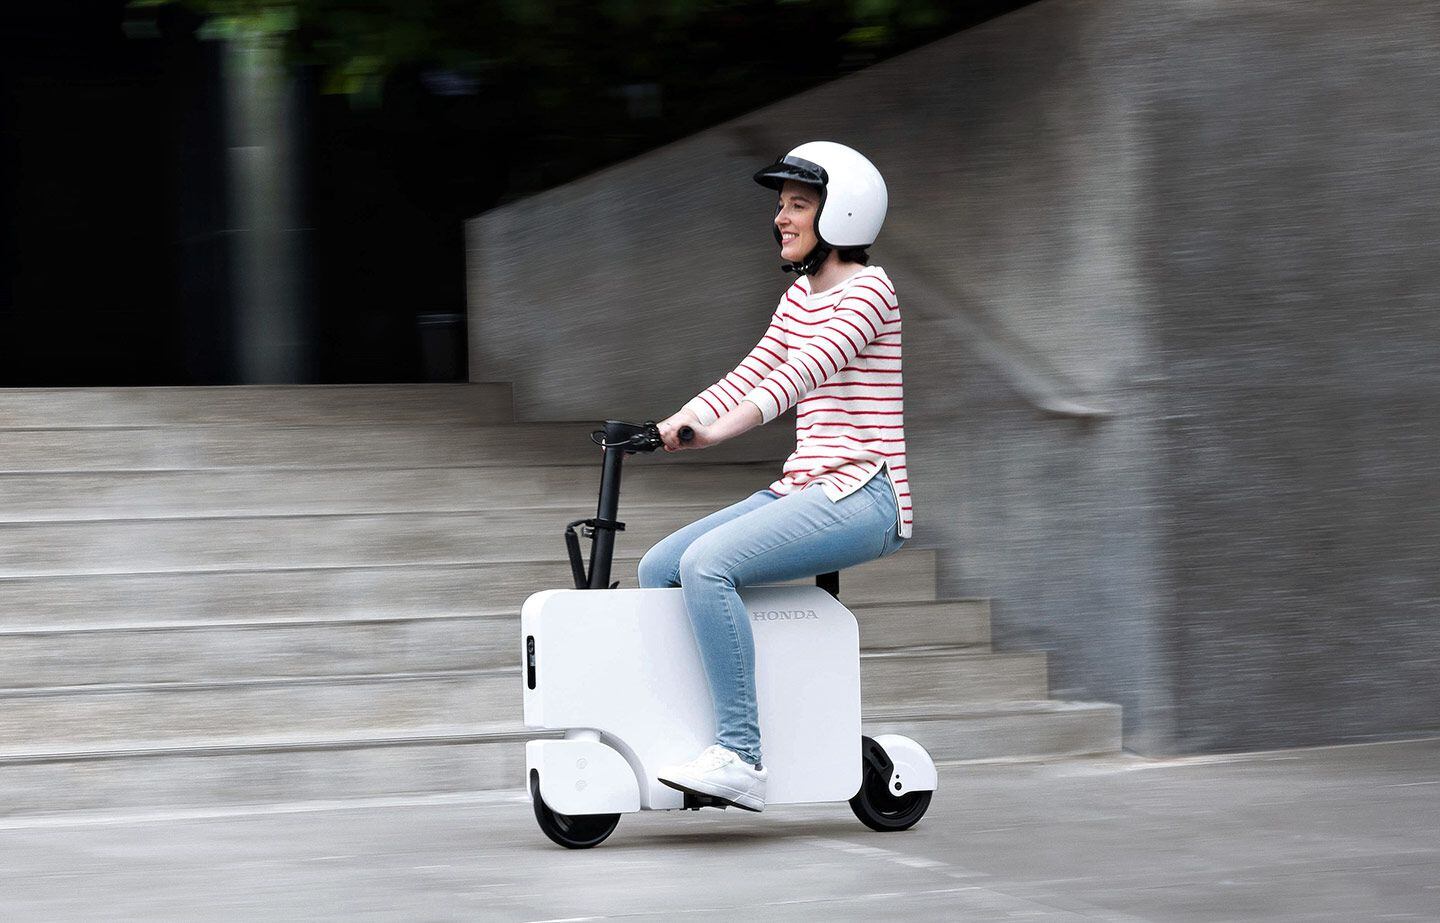 Technically the Motocompacto is classed as an electric scooter.